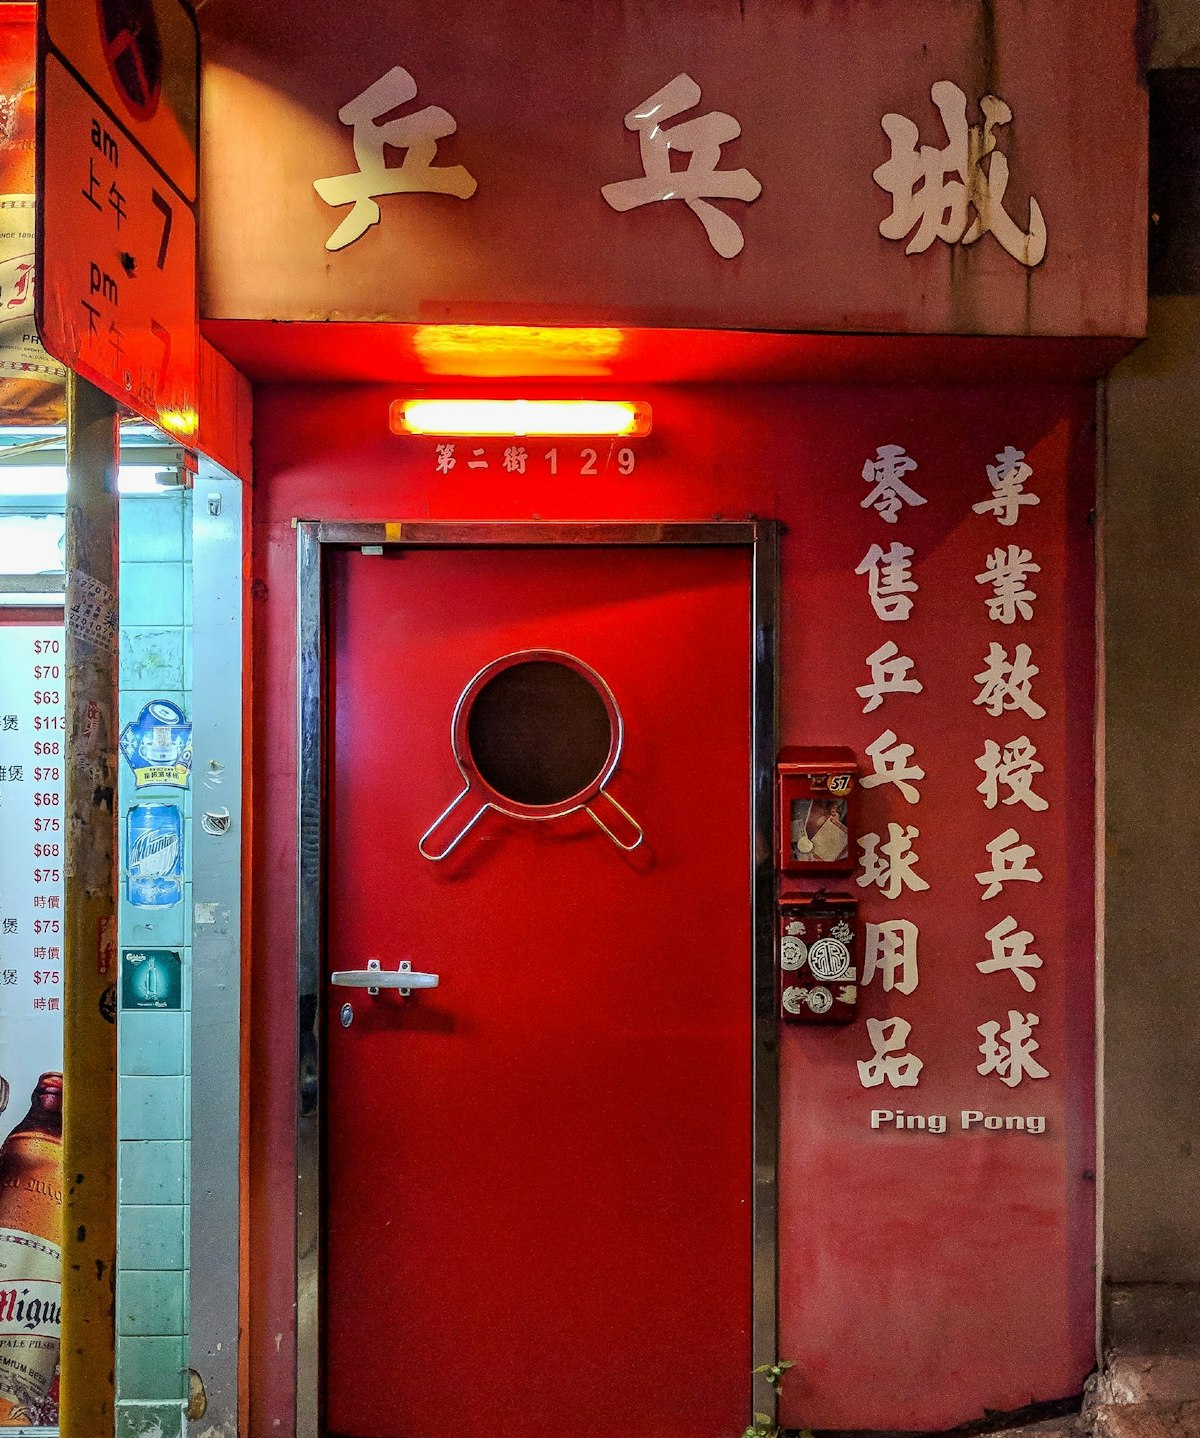 The red door entrance of gin palace Ping Pong on Second Street